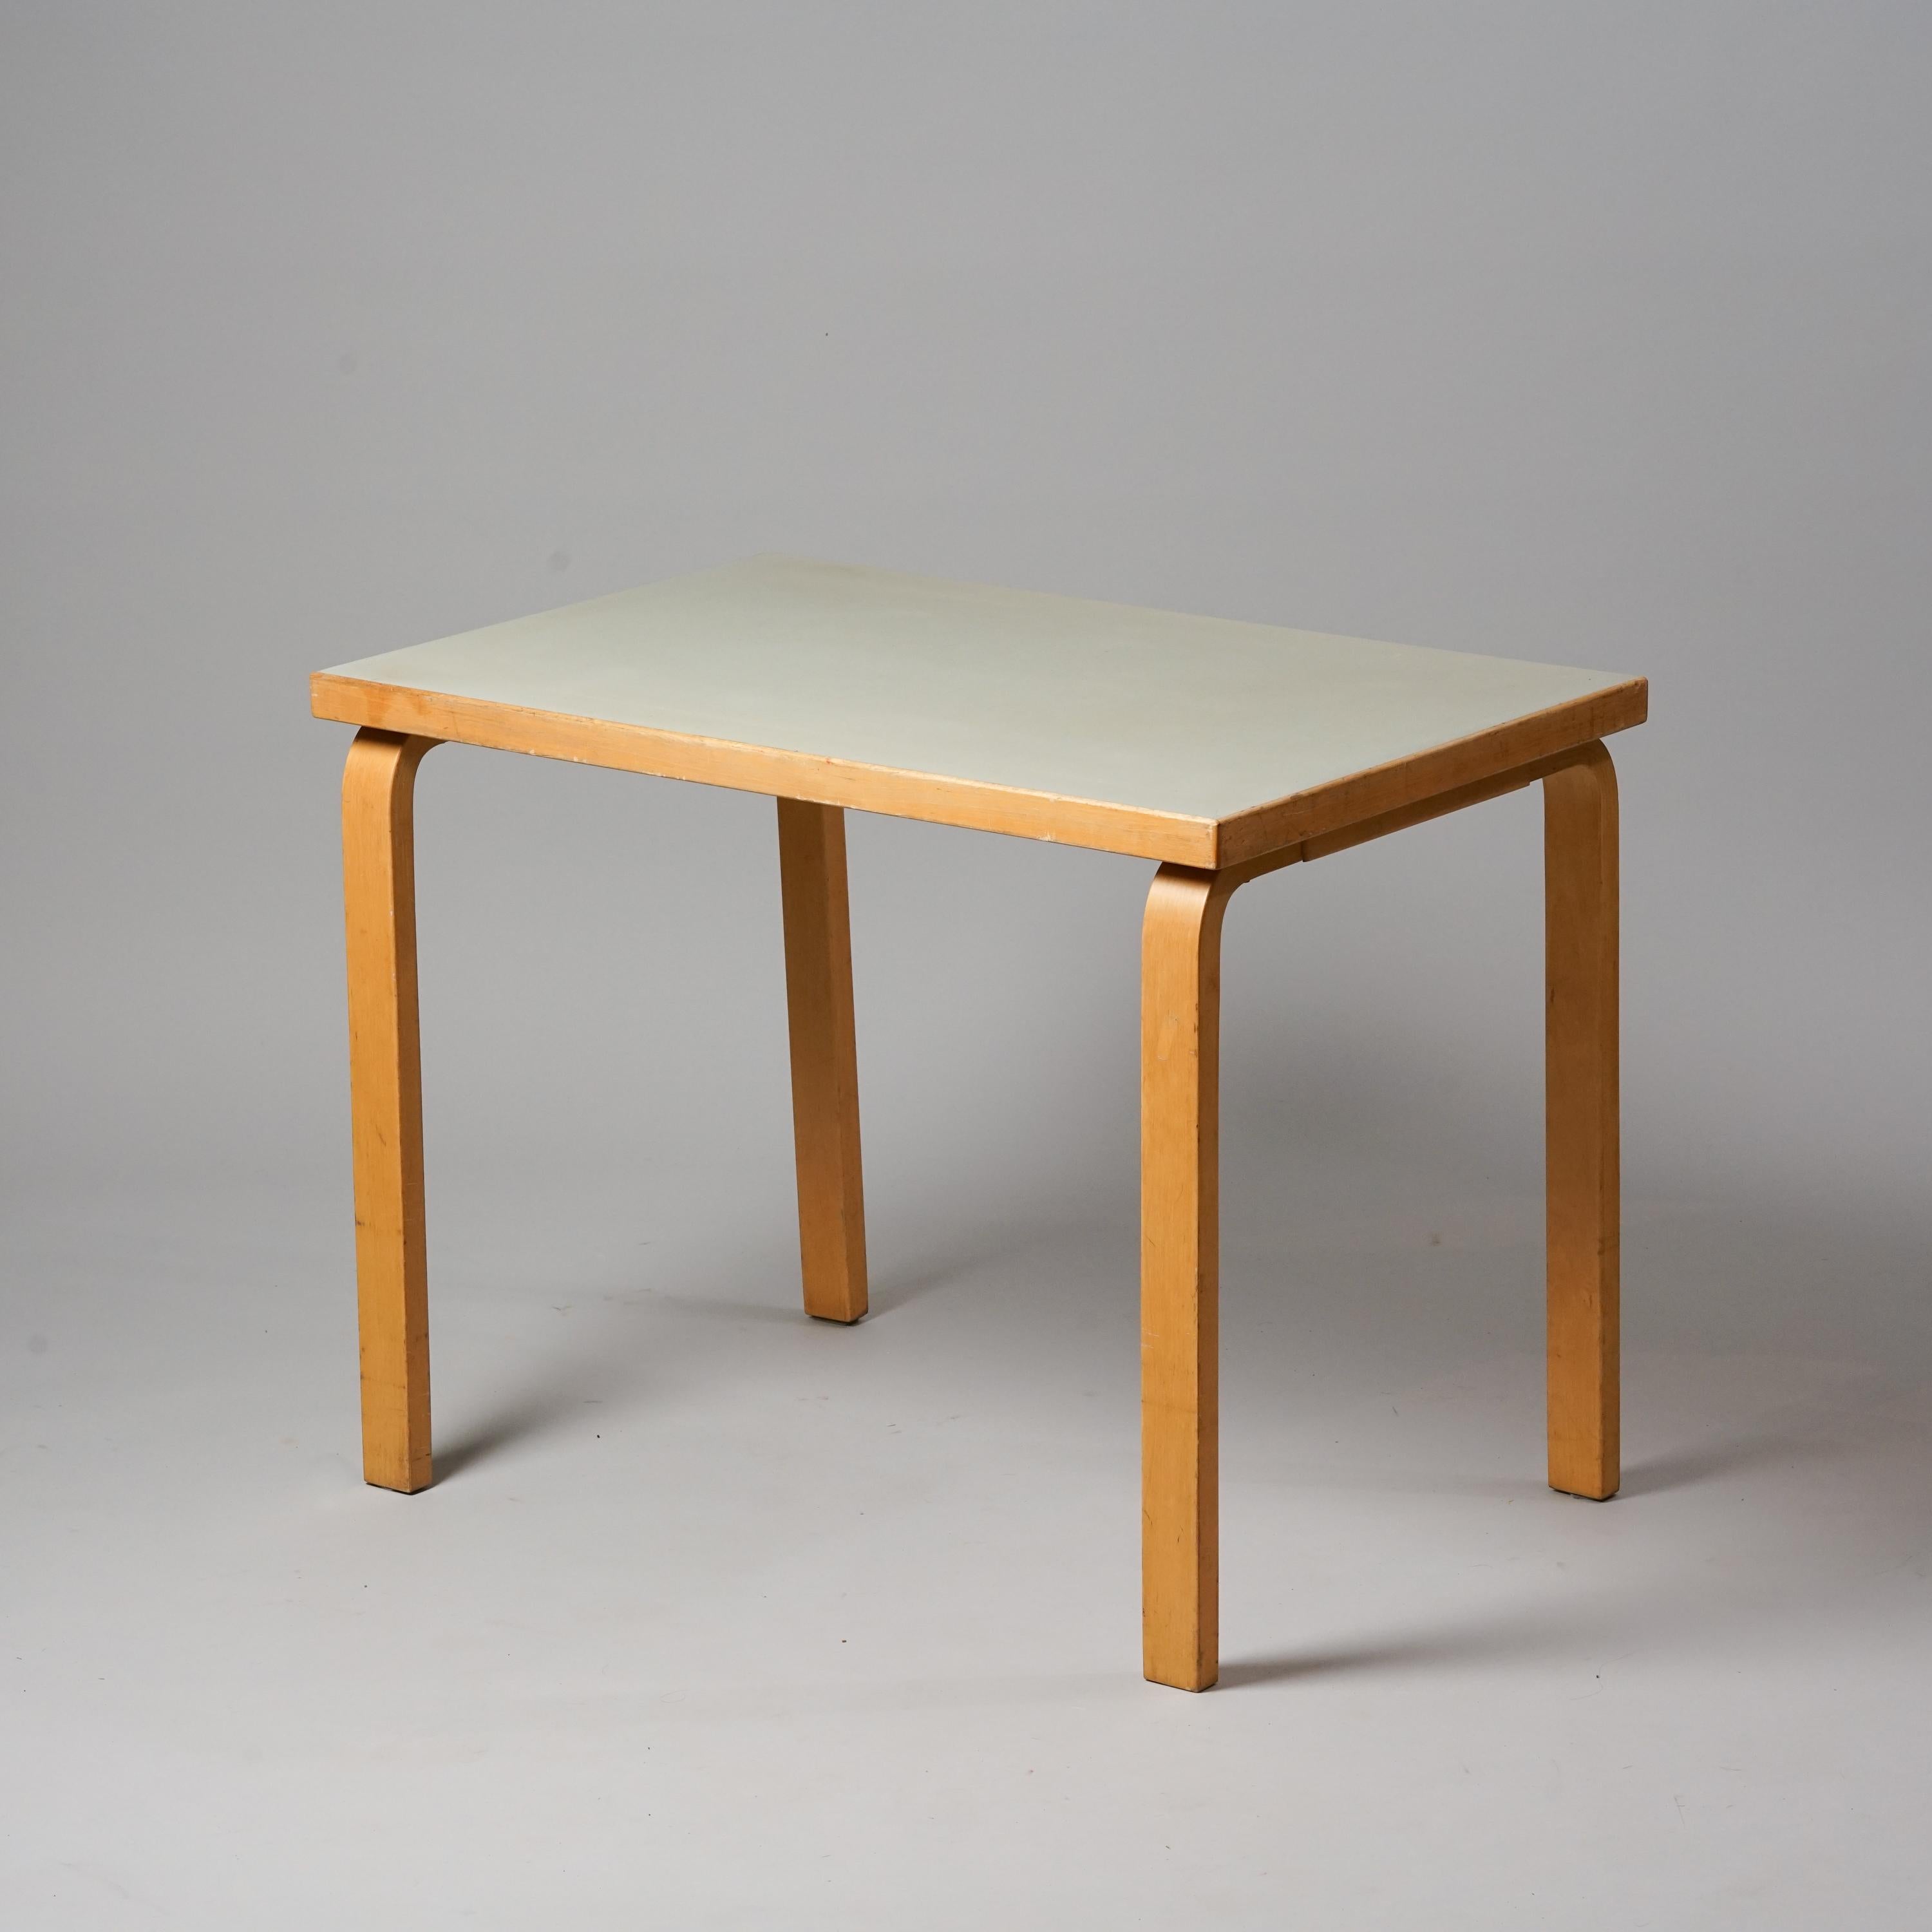 L-leg table, designed by Alvar Aalto, manufactured by Oy Huonekalu- ja Rakennustyötehdas Ab, 1950/1960s. Birch. Rare mint green color linoleum top. Good vintage condition, patina and minor wear consistent with age and use. 

Alvar Aalto (1898-1976)